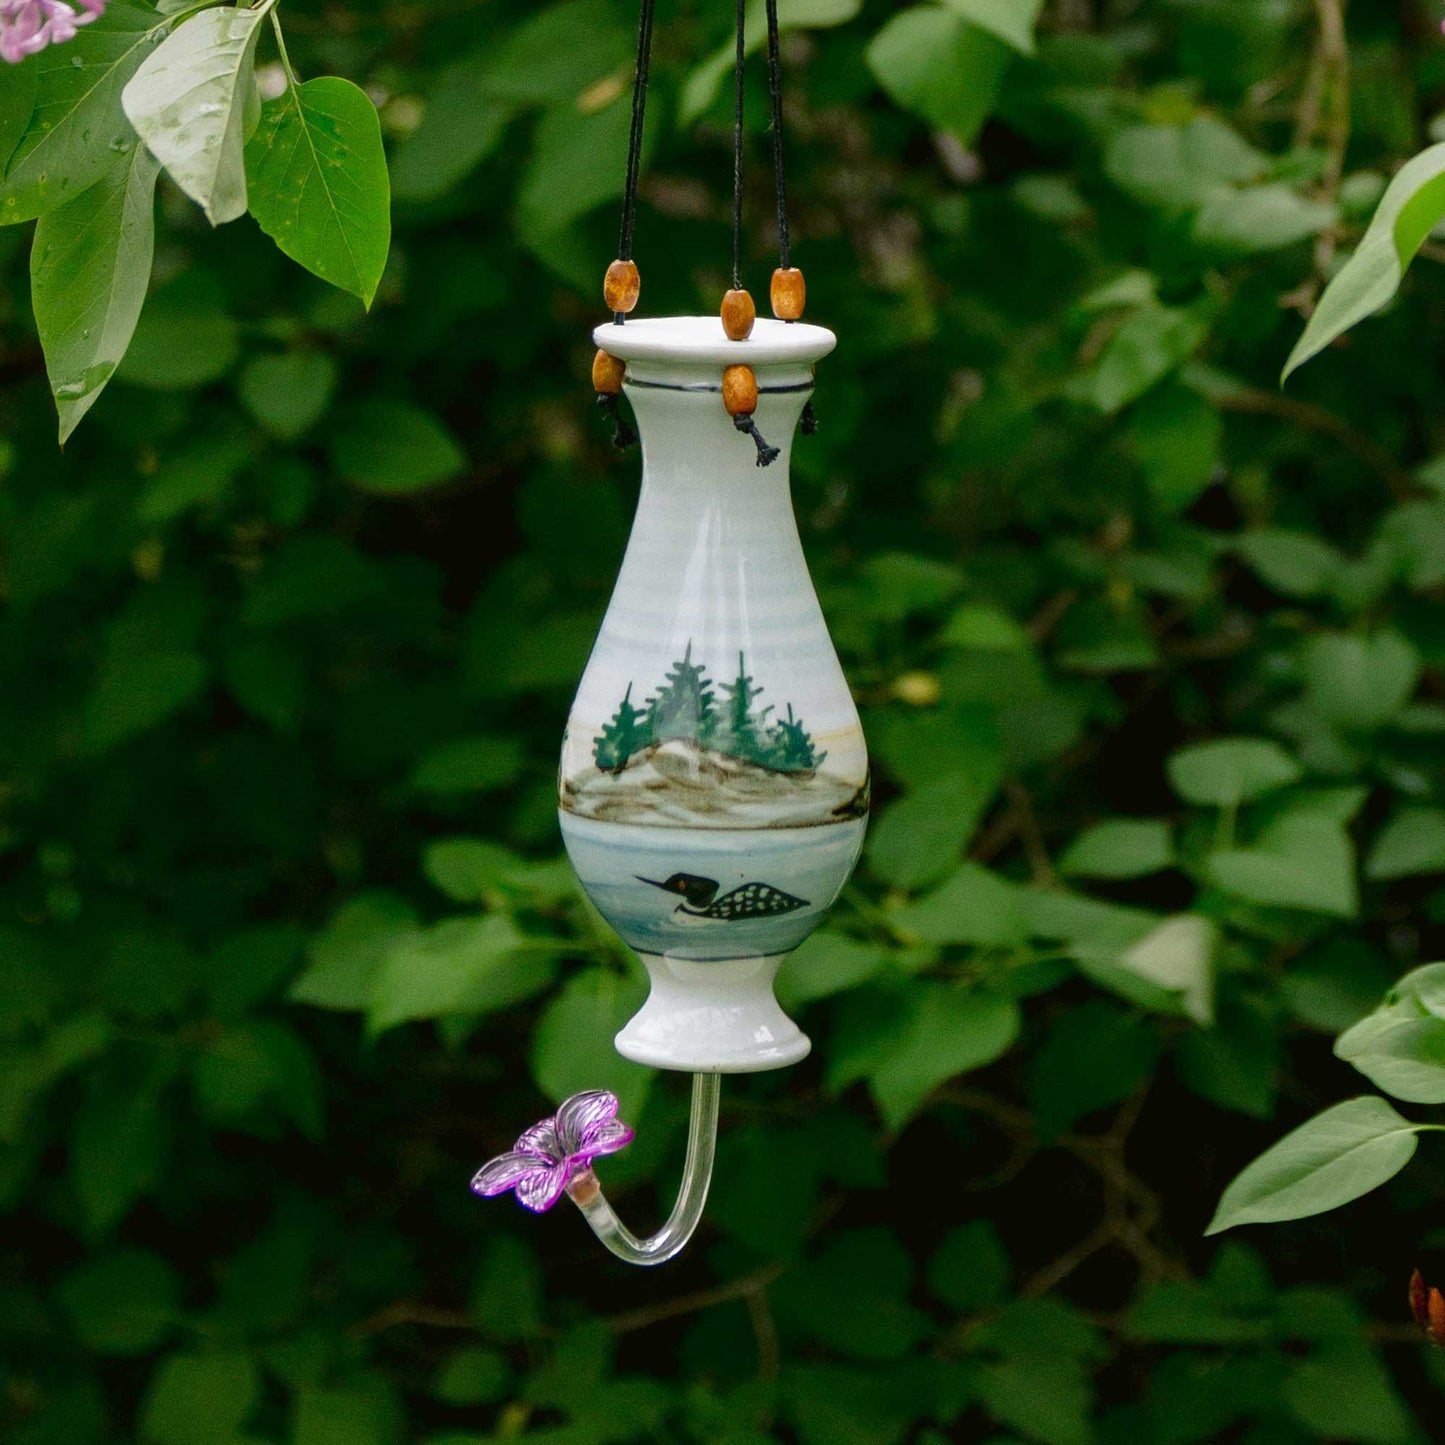 Handmade Pottery Bottle Hummingbird Feeder in Loon pattern made by Georgetown Pottery in Maine